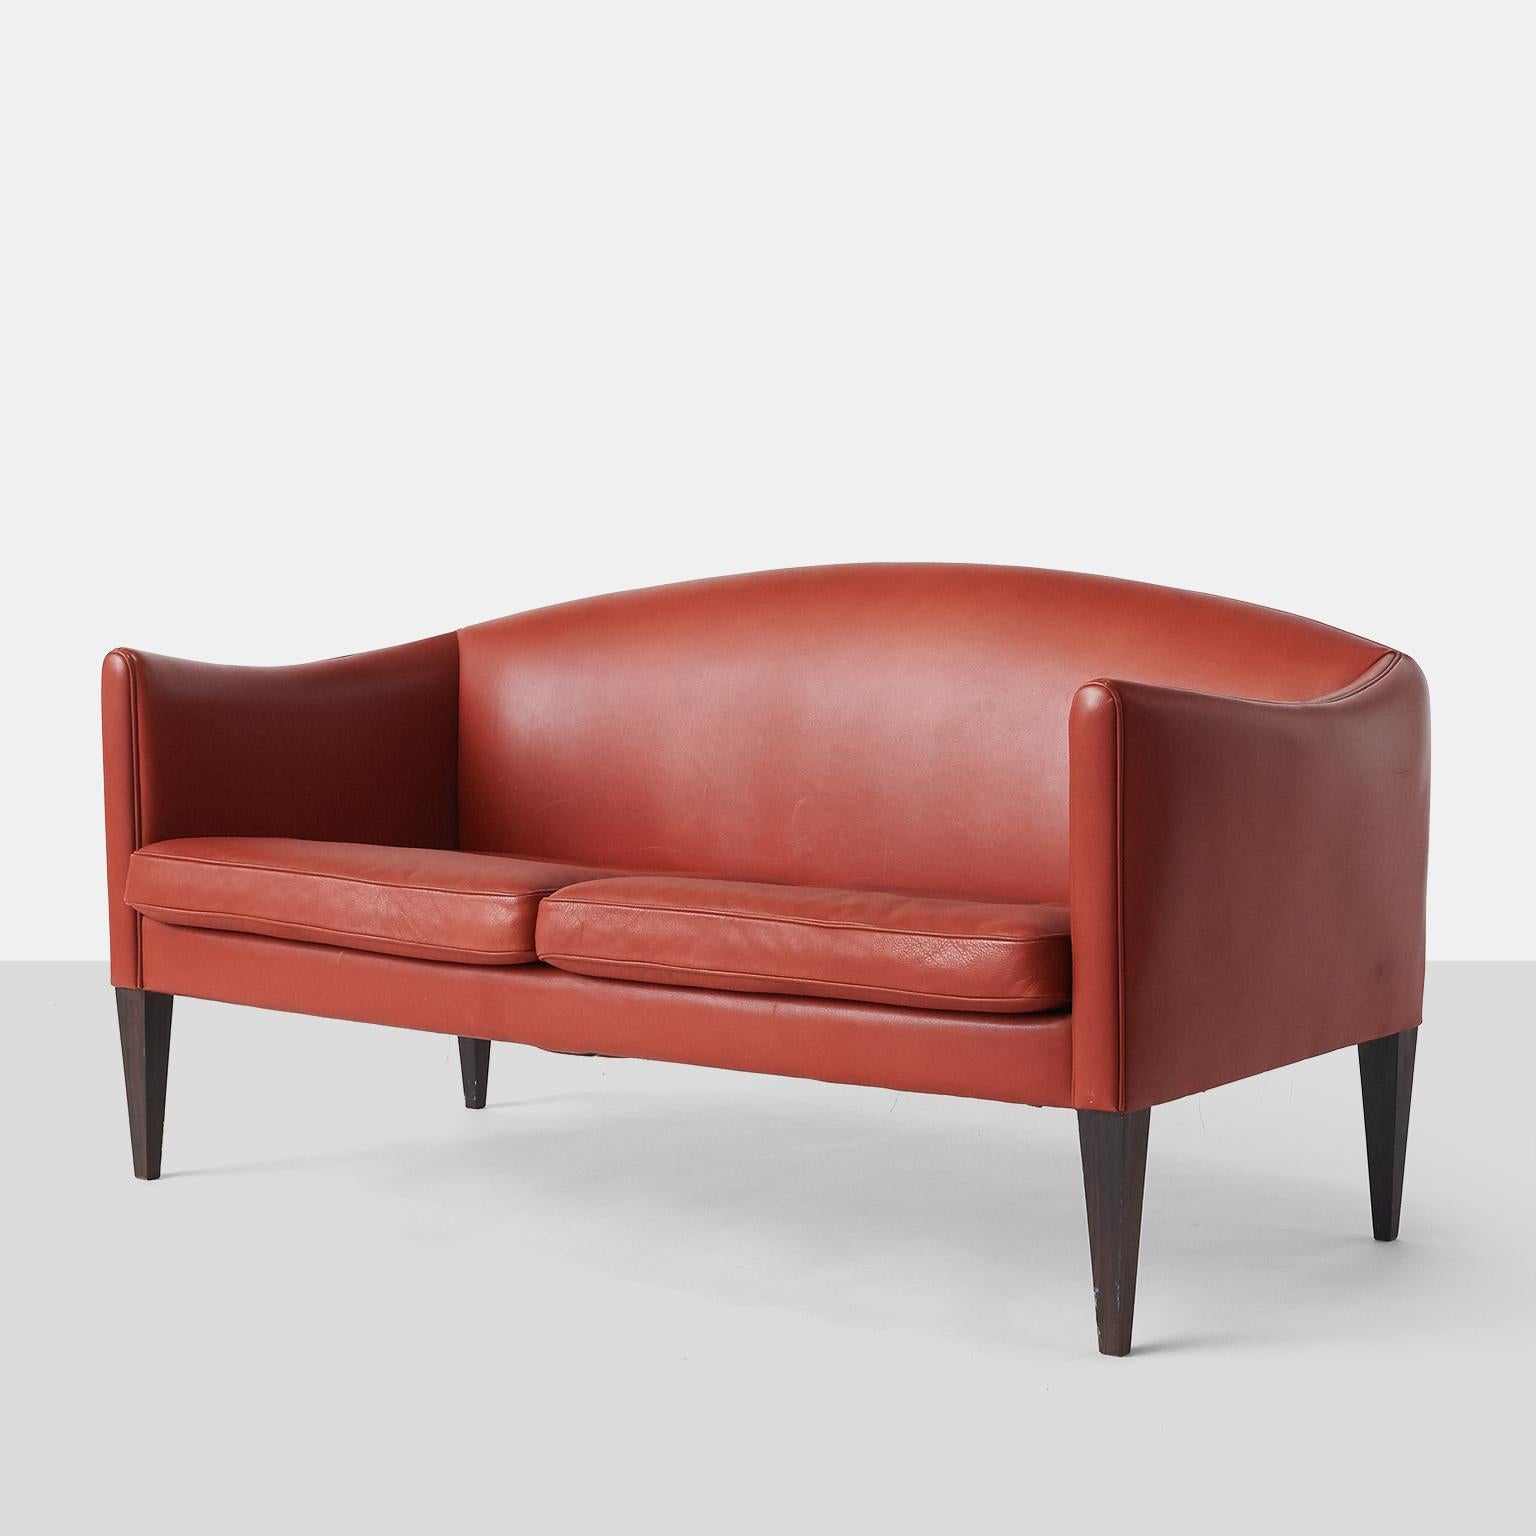 A two-seater sofa with tapered rosewood legs and 2 seat cushions. Upholstered with red leather. Model V12.

Exceptional condition for a piece of this vintage. Very little wear with only very slight abrasions to the arms and near perfection on the